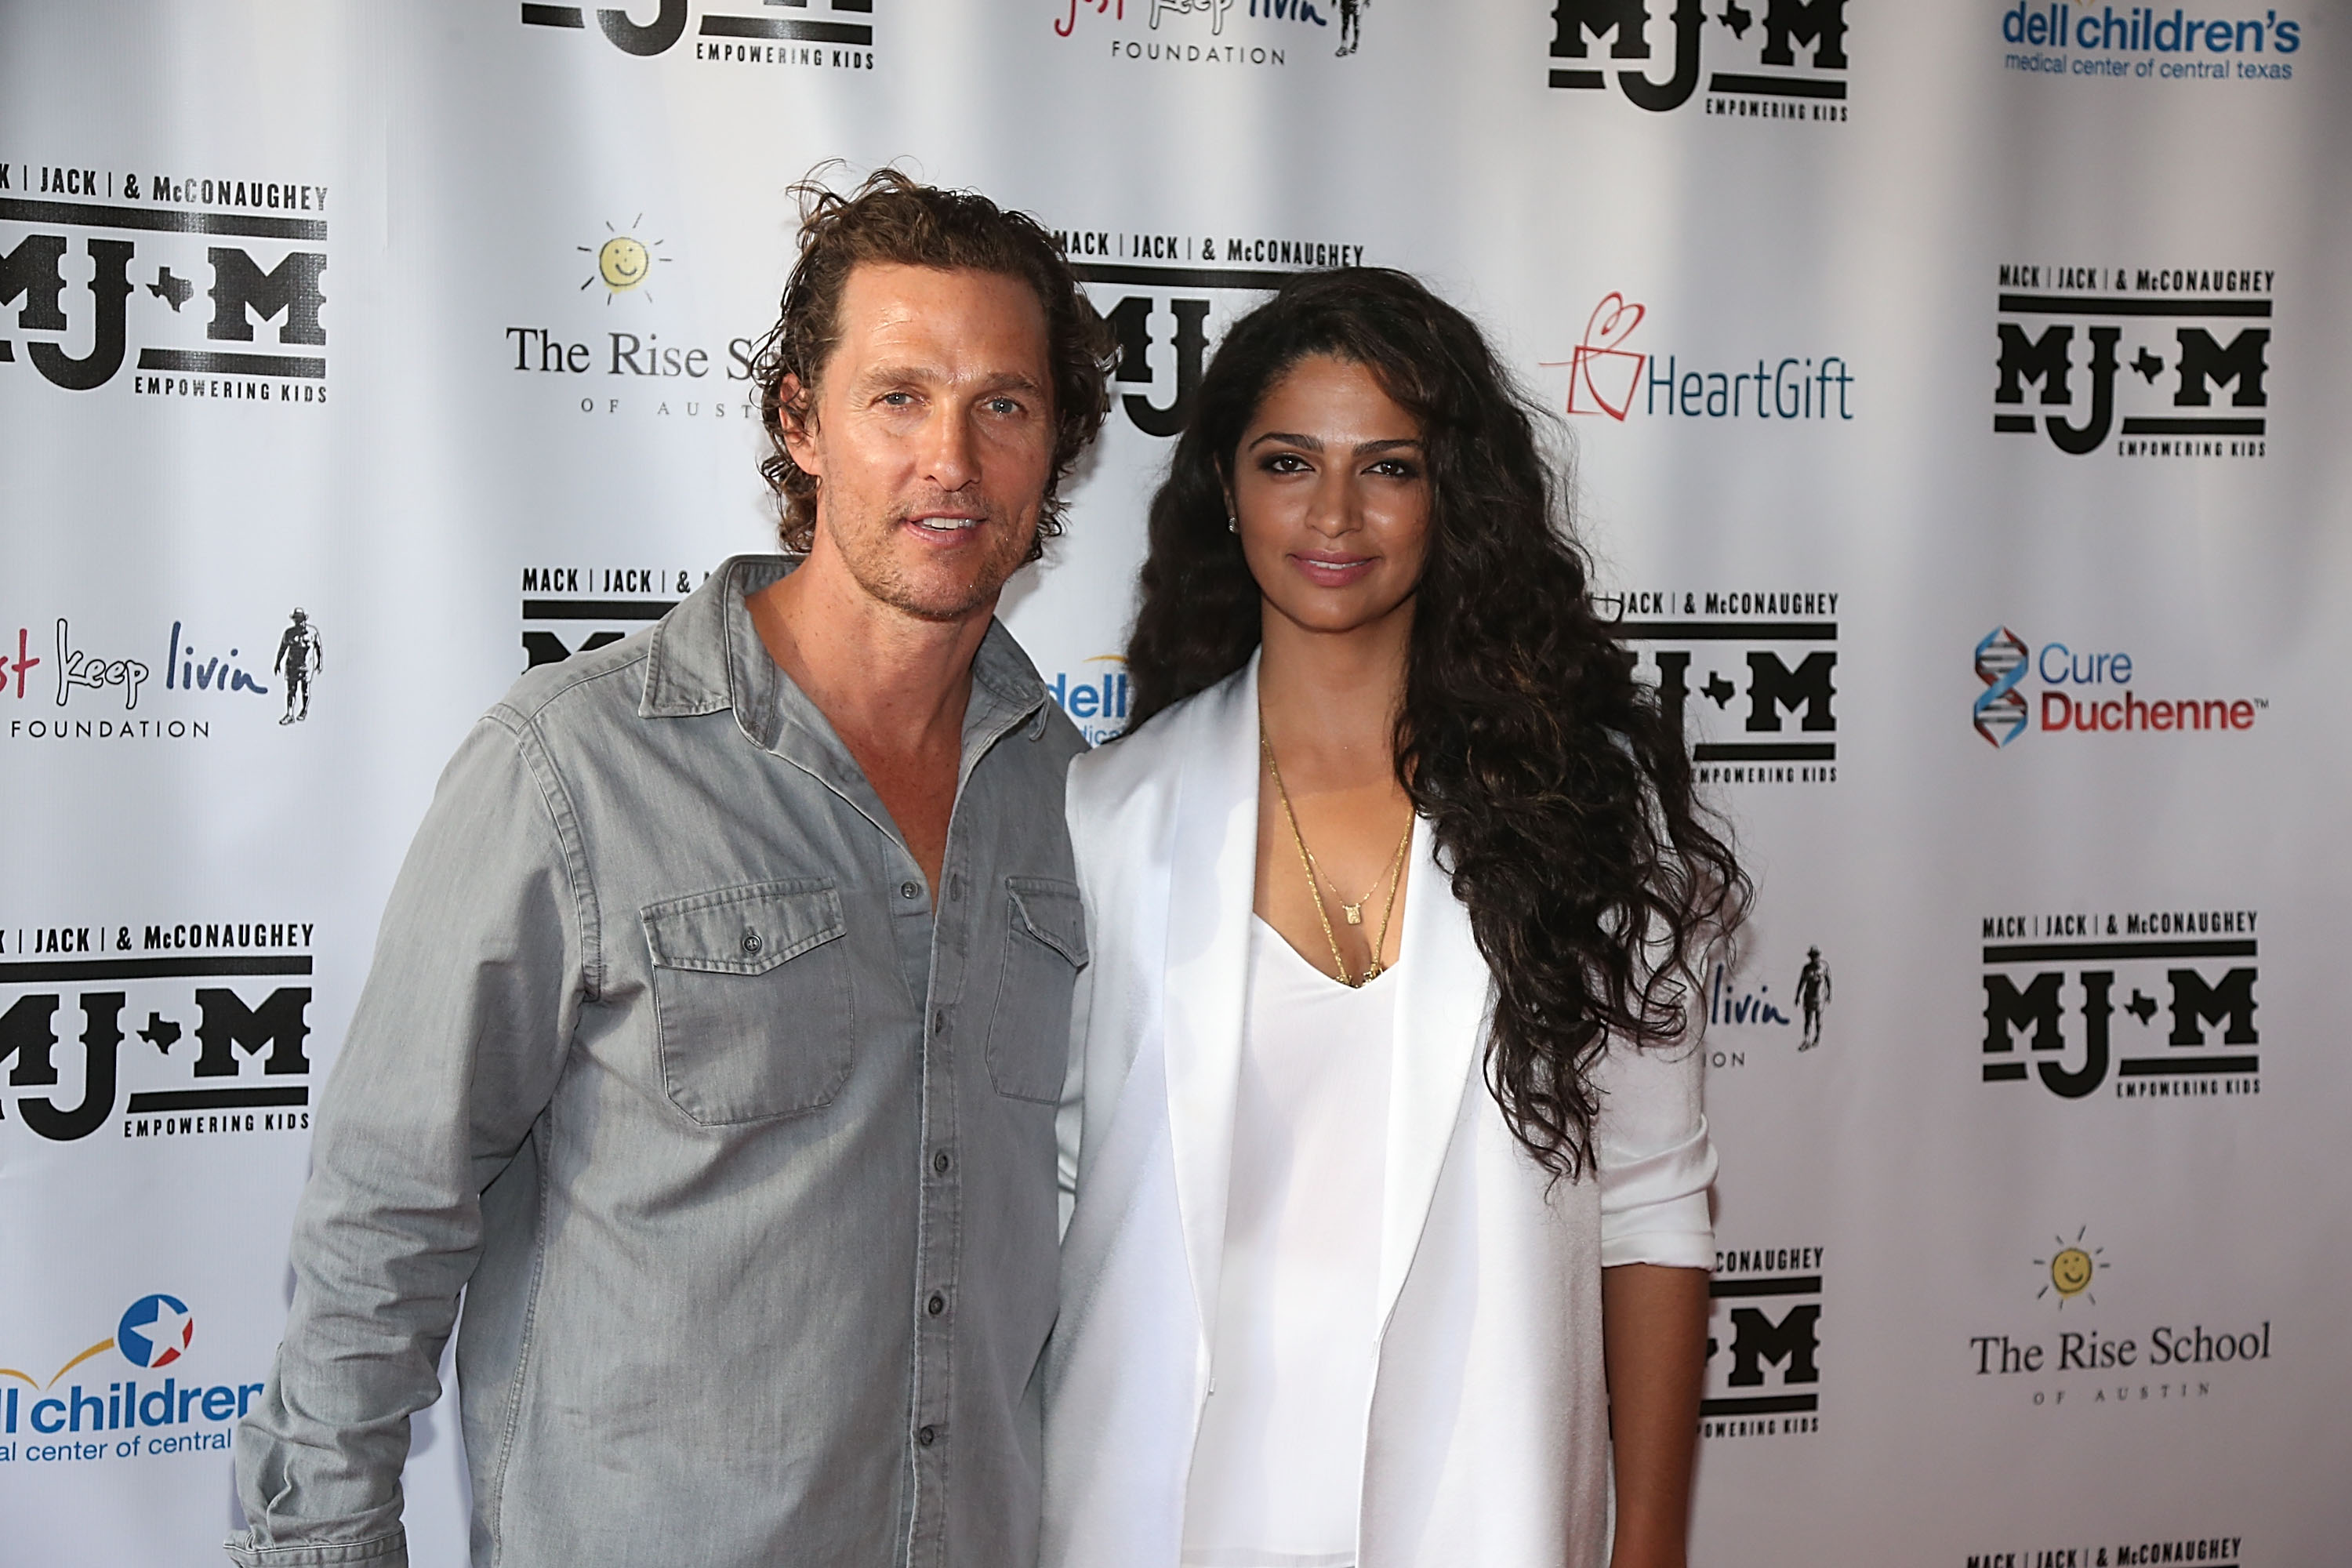 Matthew McConaughey and Camila Alves together at ACL Live